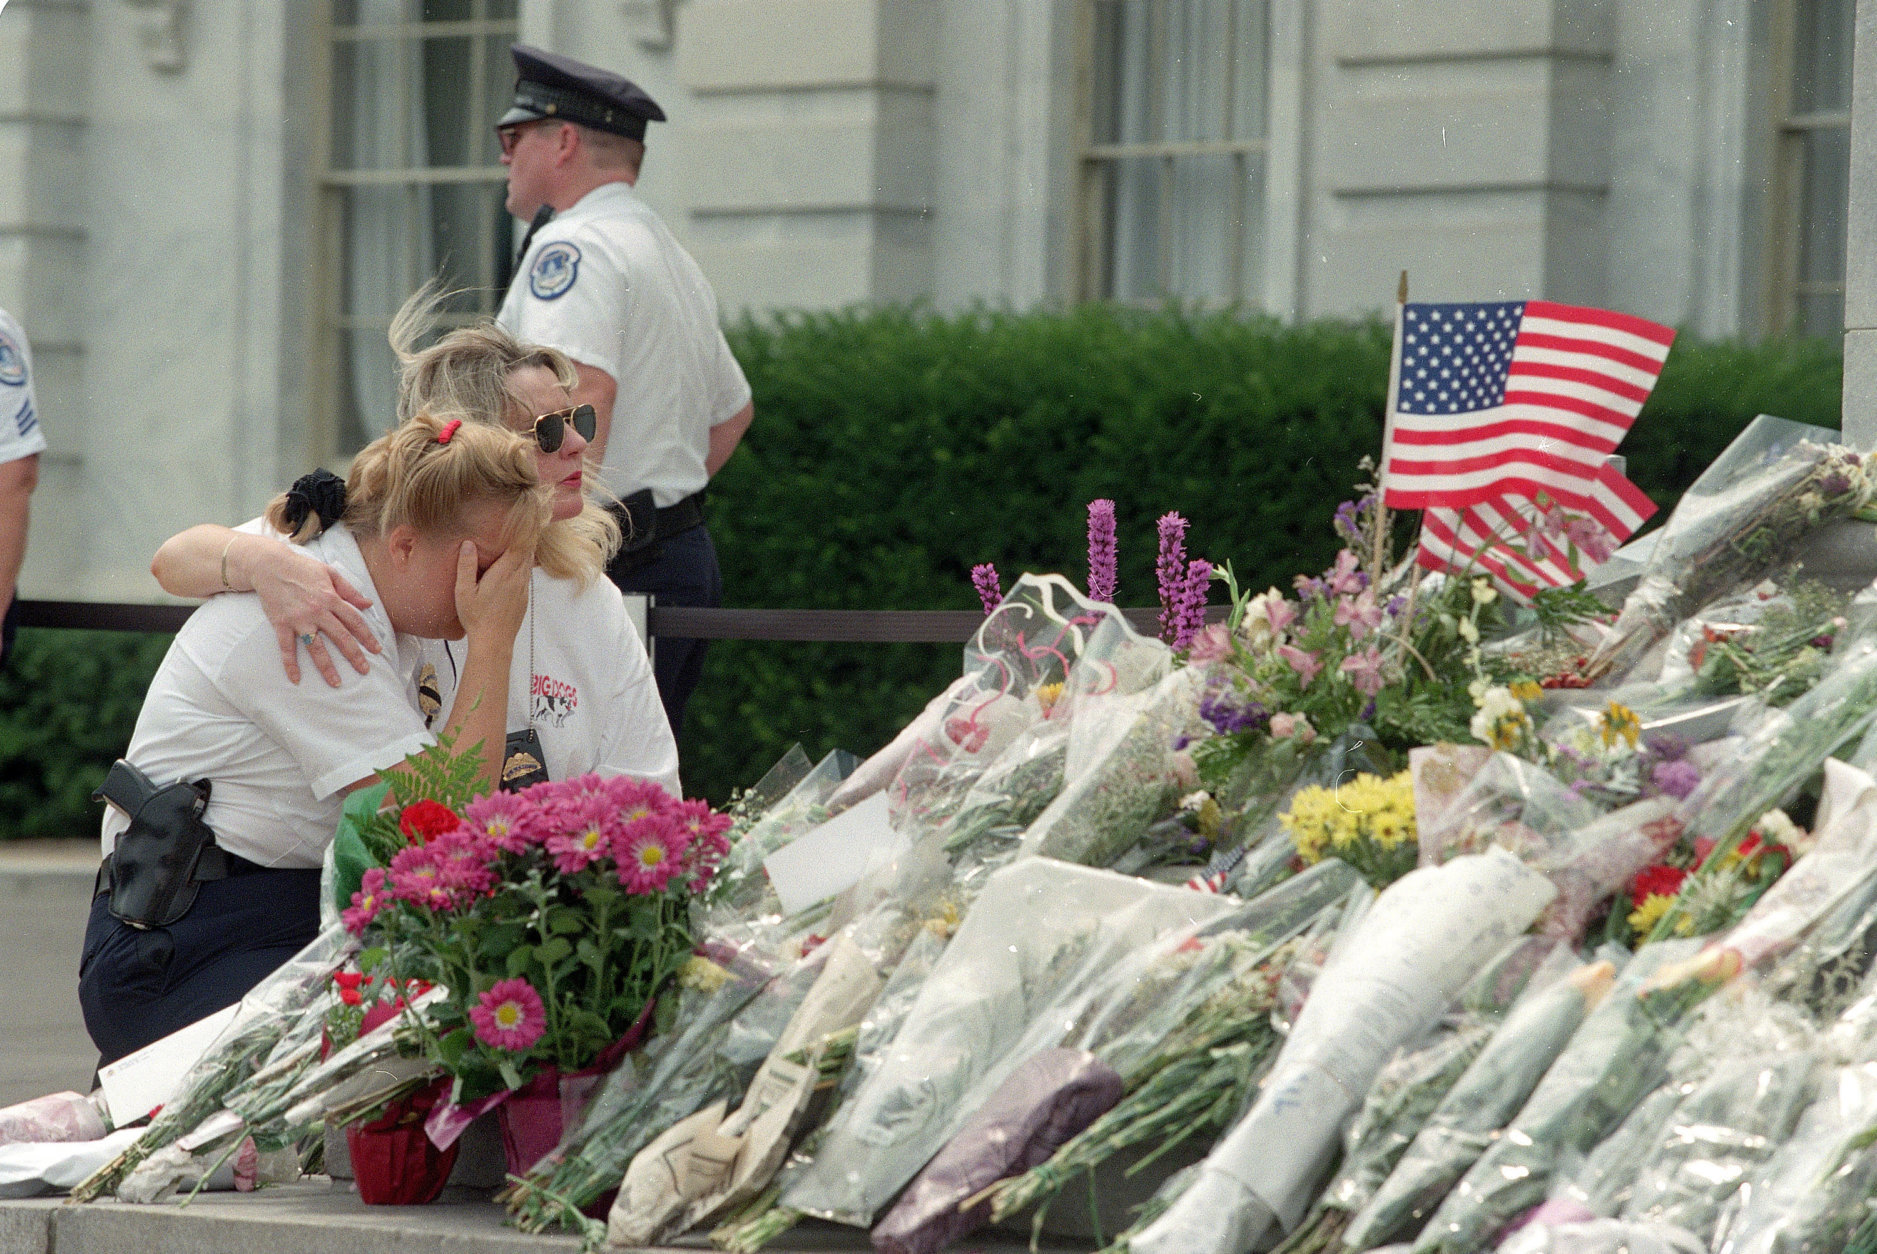 Capitol police officer Heidi Milhan, left, is comforted by an unidentified Capitol Hill visitor near flowers placed on the steps of the Capitol Monday, July 27,1998, in honor of two Capitol police officers who were shot and killed. (AP Photo/Khue Bui)